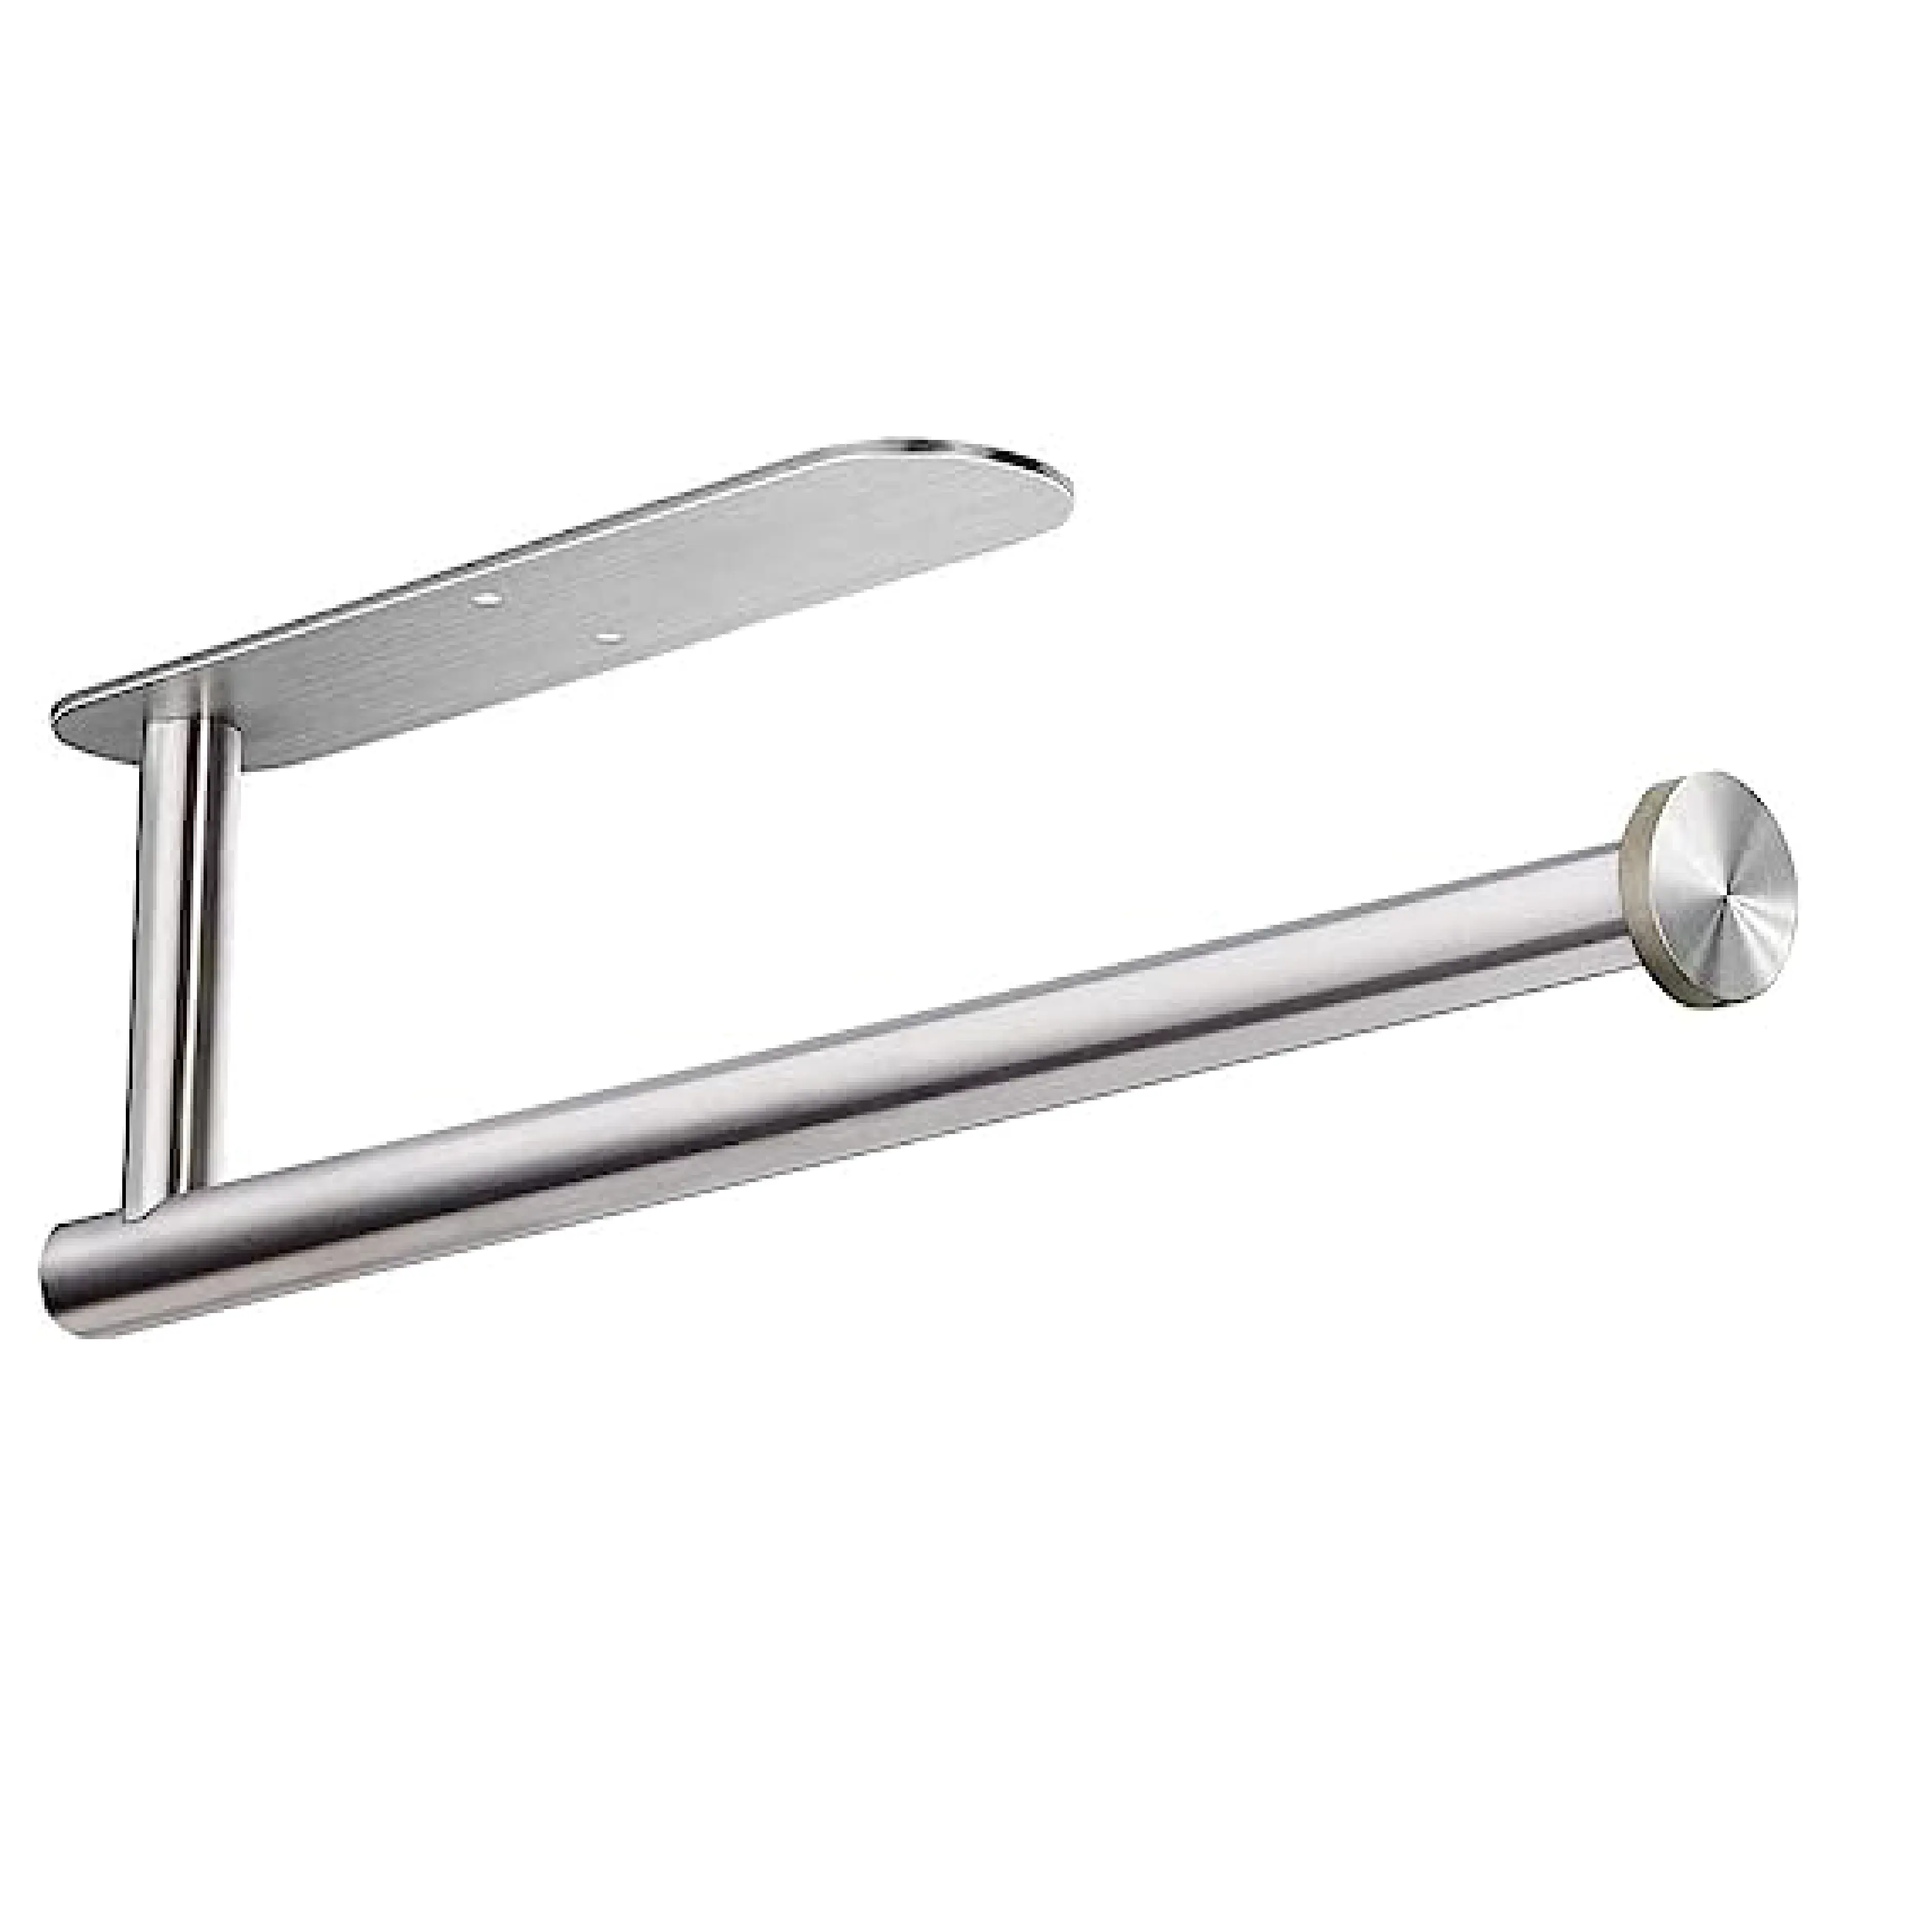 Stainless Steel Kitchen Paper Towel Roll Holder Both Available in Adhesive and Screws